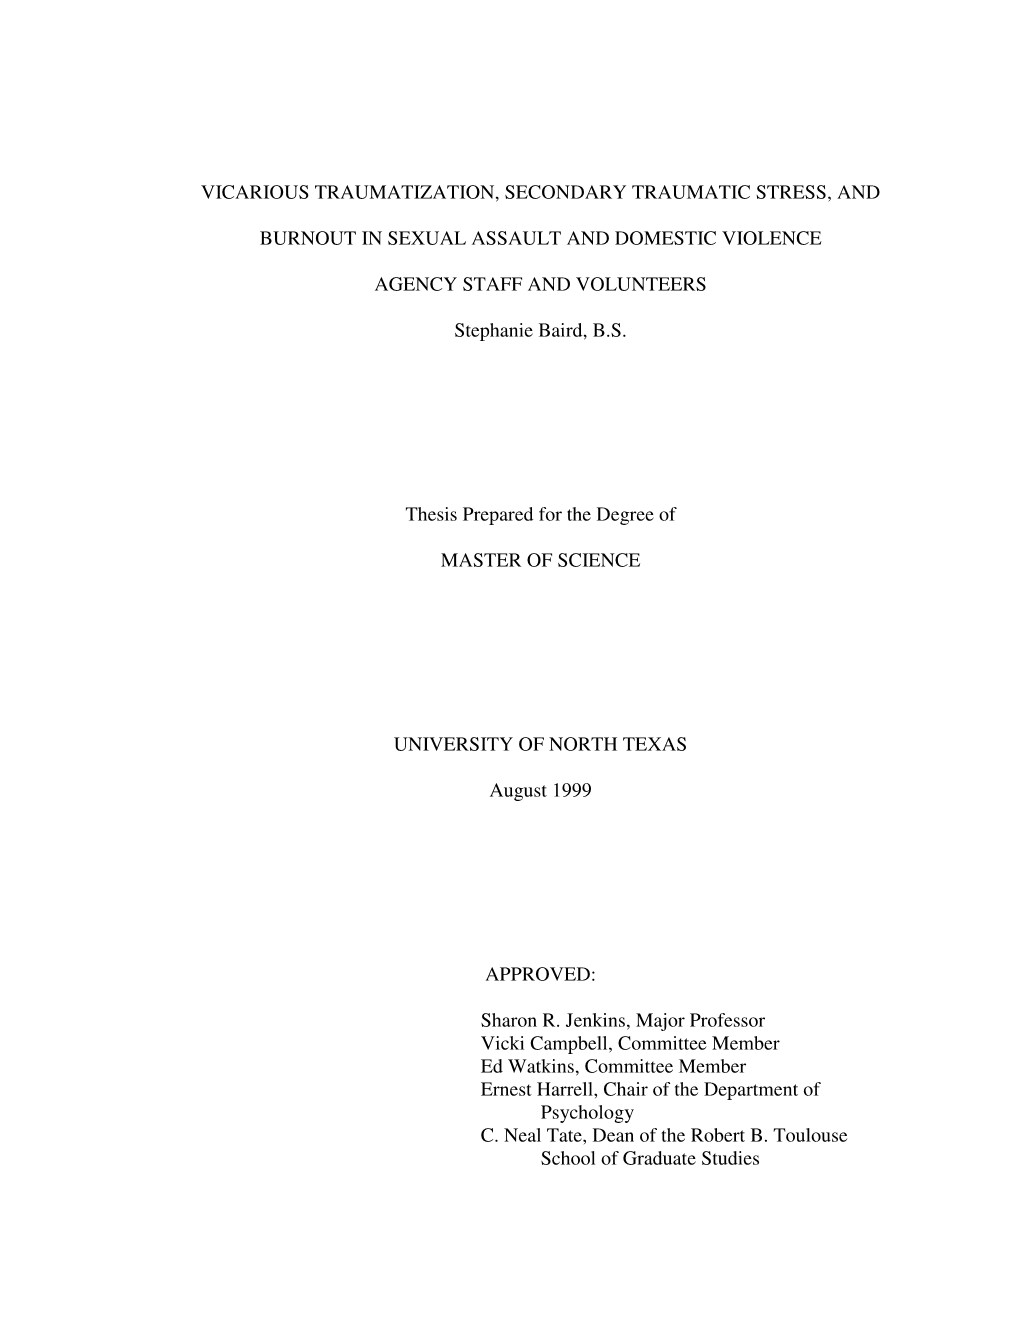 Vicarious Traumatization, Secondary Traumatic Stress, and Burnout in Sexual Assault and Domestic Violence Agency Staff and Volunteers